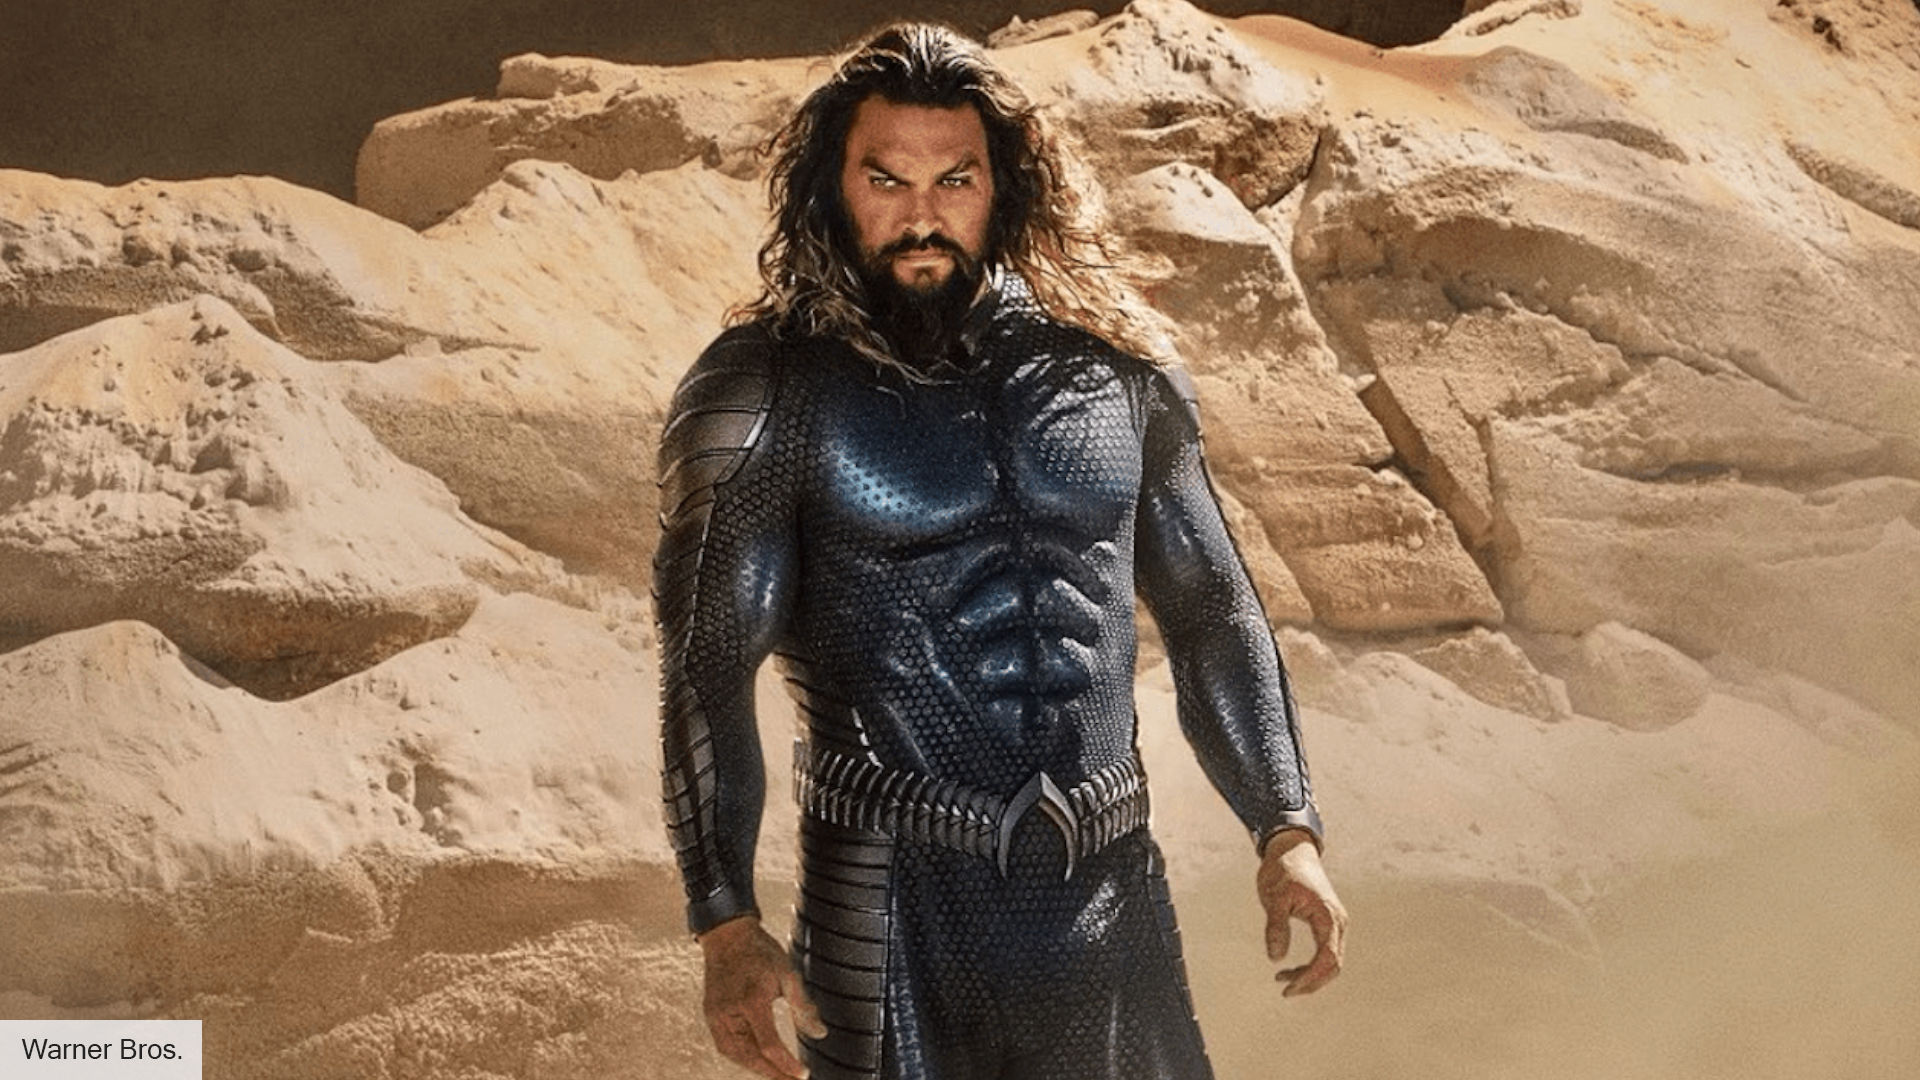 Aquaman 2 release date, cast, story, trailer, and more | The Digital Fix